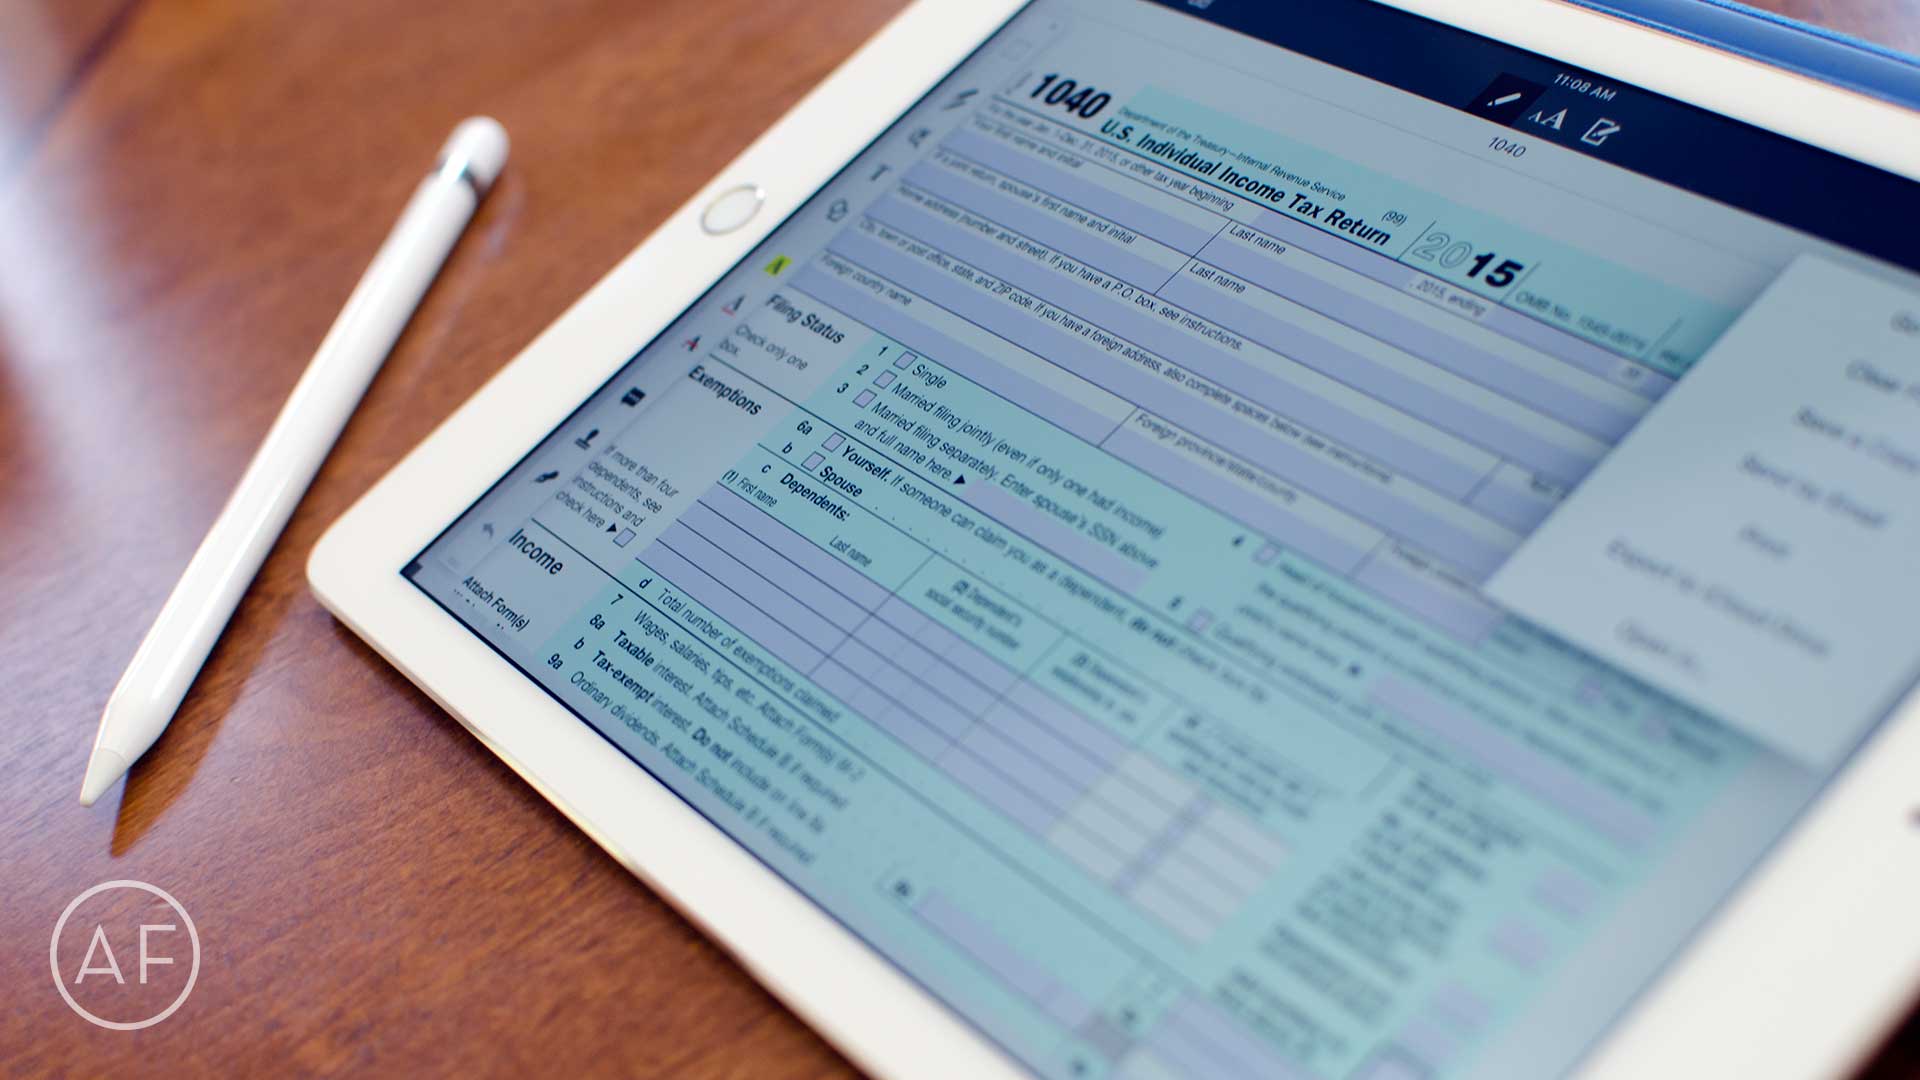 The iPad is great at handling PDFs and other kinds of documents. Here are 4 must-have apps.